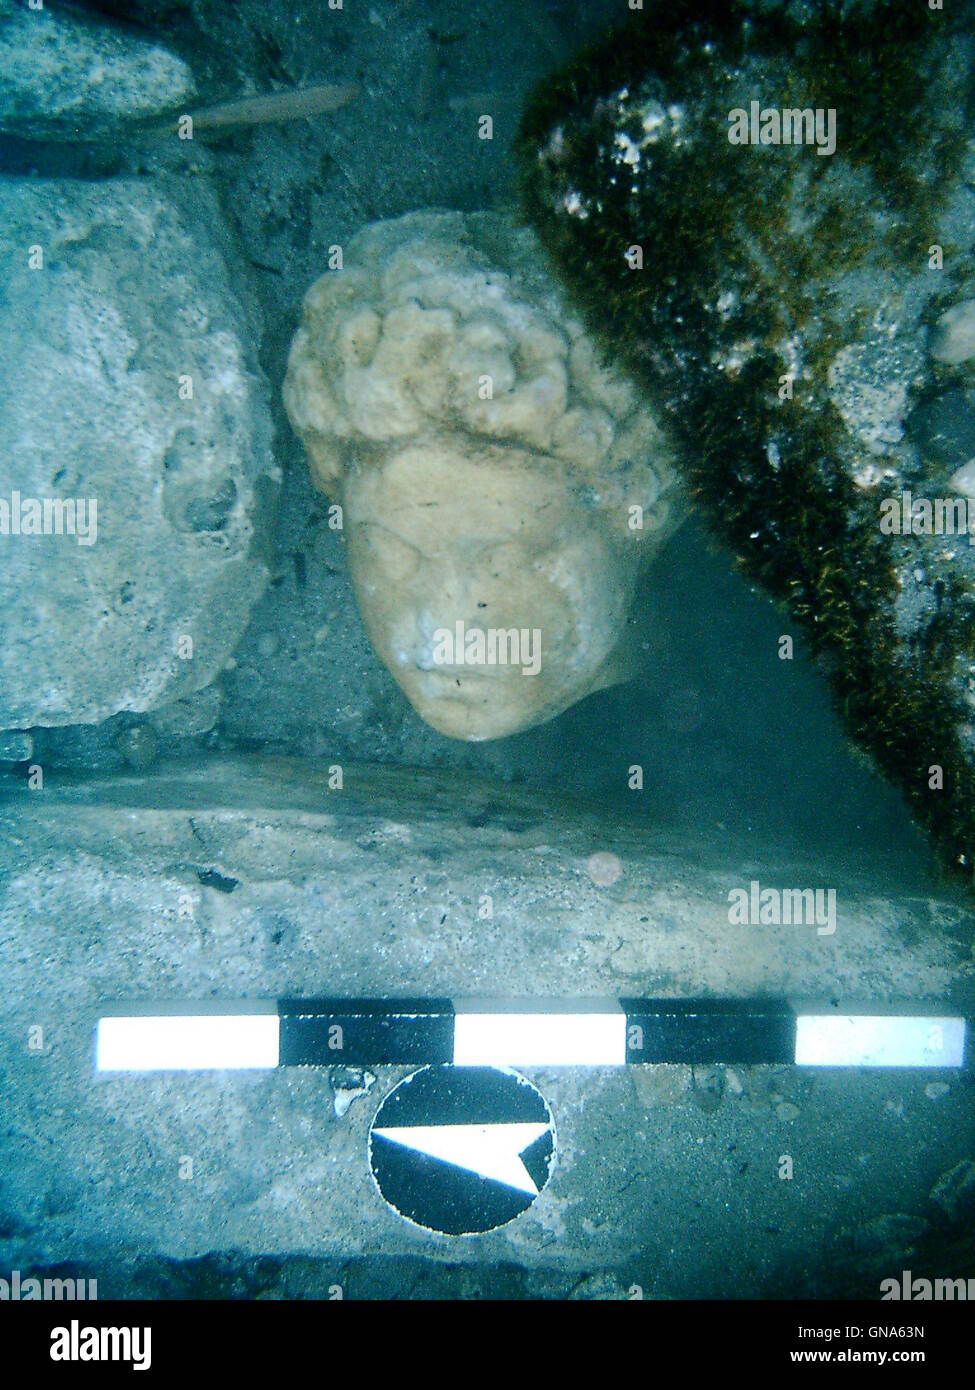 (160829) -- ATHENS, Aug. 29 (Xinhua) -- The undated file photo taken by Greece's Ephorate of Underwater Antiquities (EUA) shows the head of a statue discovered at the ancient port of Kythnos island in Greece. Lacking funds partly because of the debt crisis, Greece which is rich in underwater antiquities, is now working closely with archaeological groups from other countries to explore, preserve and display the treasure trove. (Xinhua) To match Feature: Greece strives to preserve underwater antiquities Stock Photo